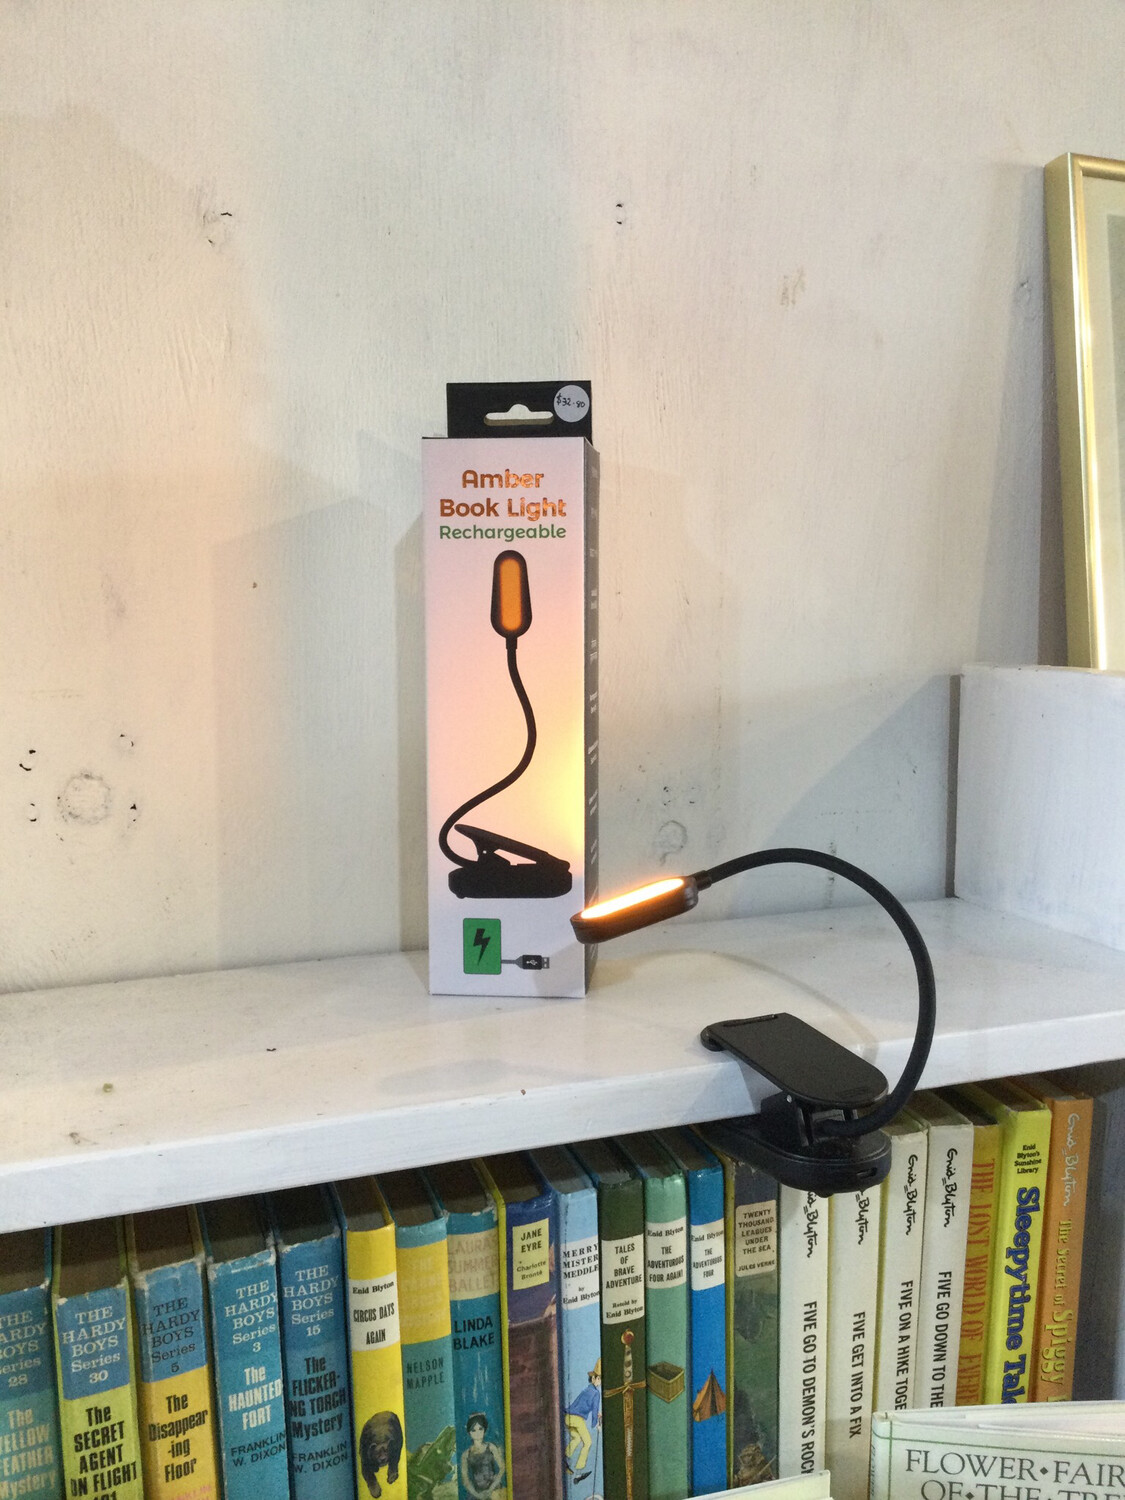 Amber Book Light Rechargeable